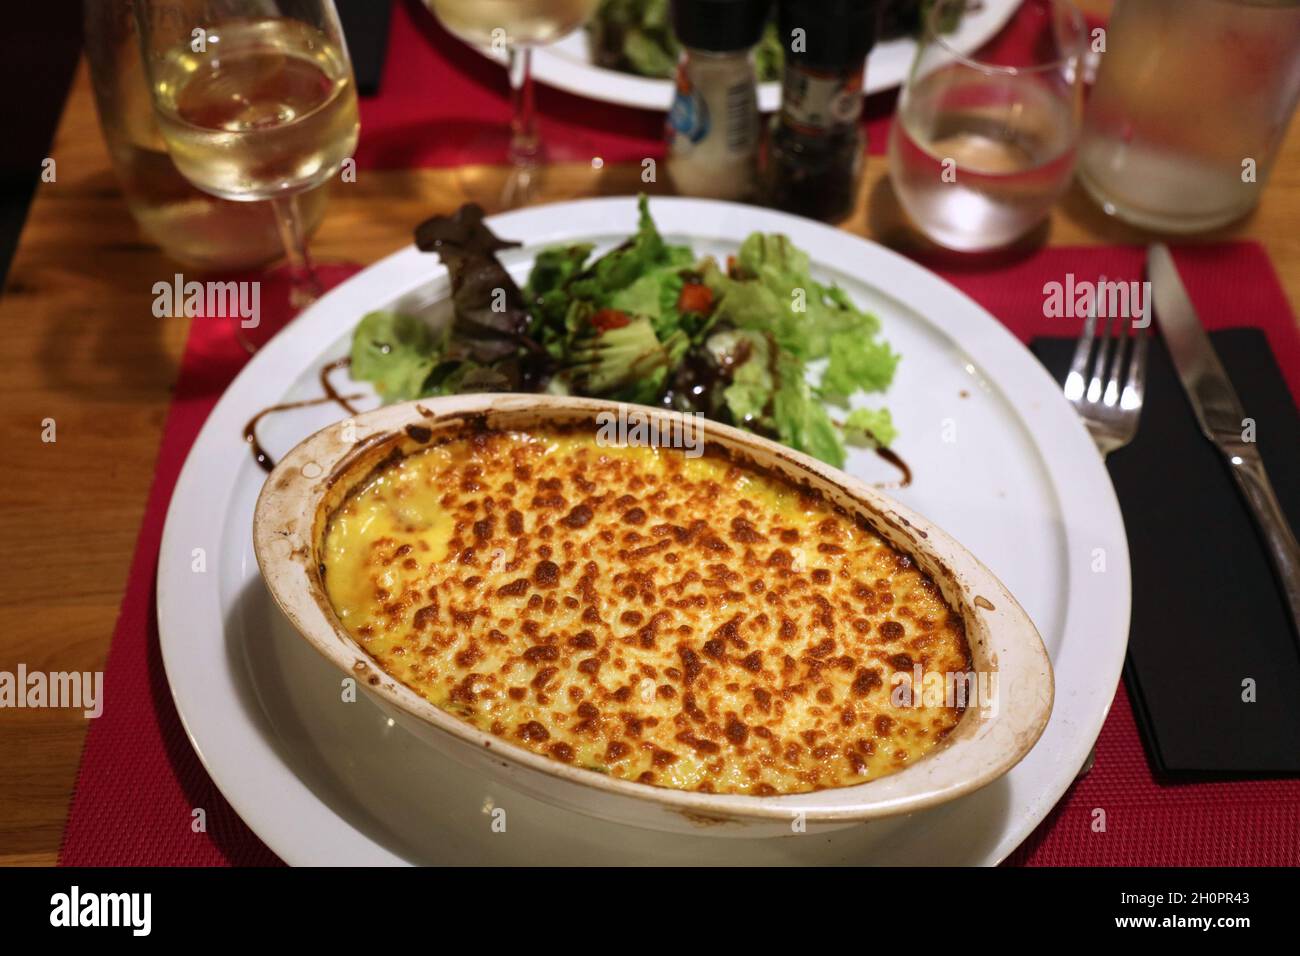 Seafood and potato gratine in France. French food. Cuisine of France. Stock Photo